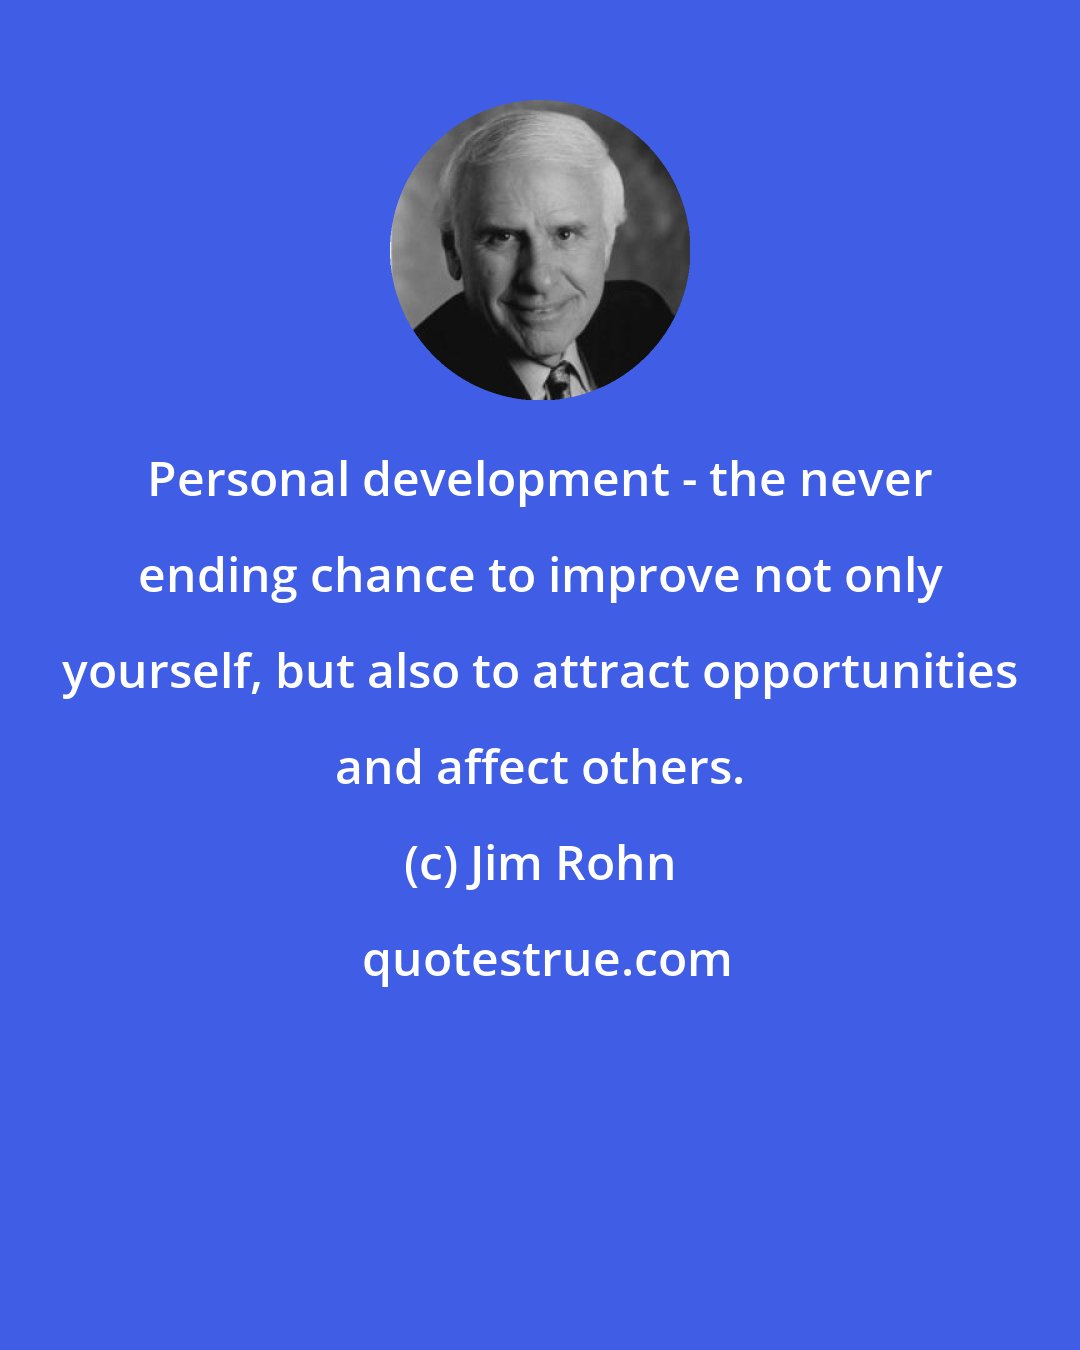 Jim Rohn: Personal development - the never ending chance to improve not only yourself, but also to attract opportunities and affect others.